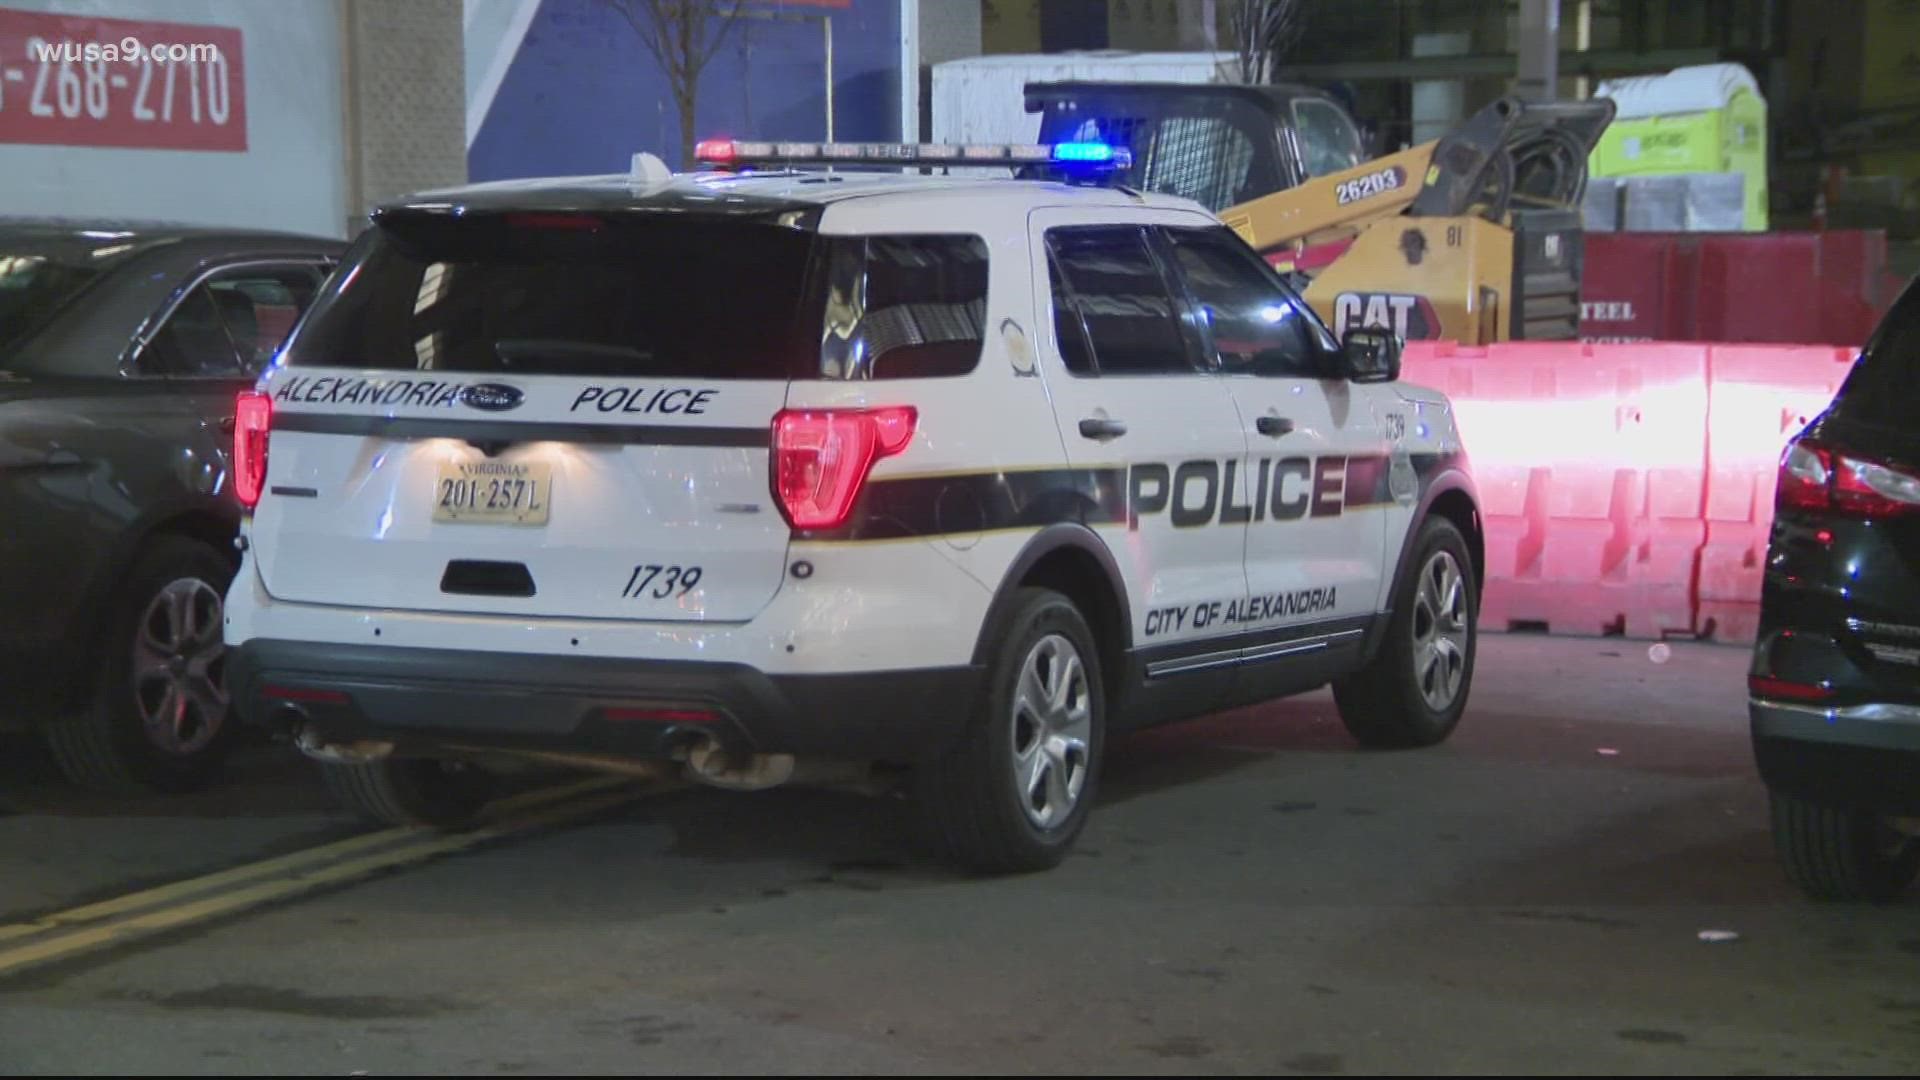 Alexandria City Police Department said a police officer was struck by a vehicle during a domestic dispute Monday, but the officer's injuries are not serious.